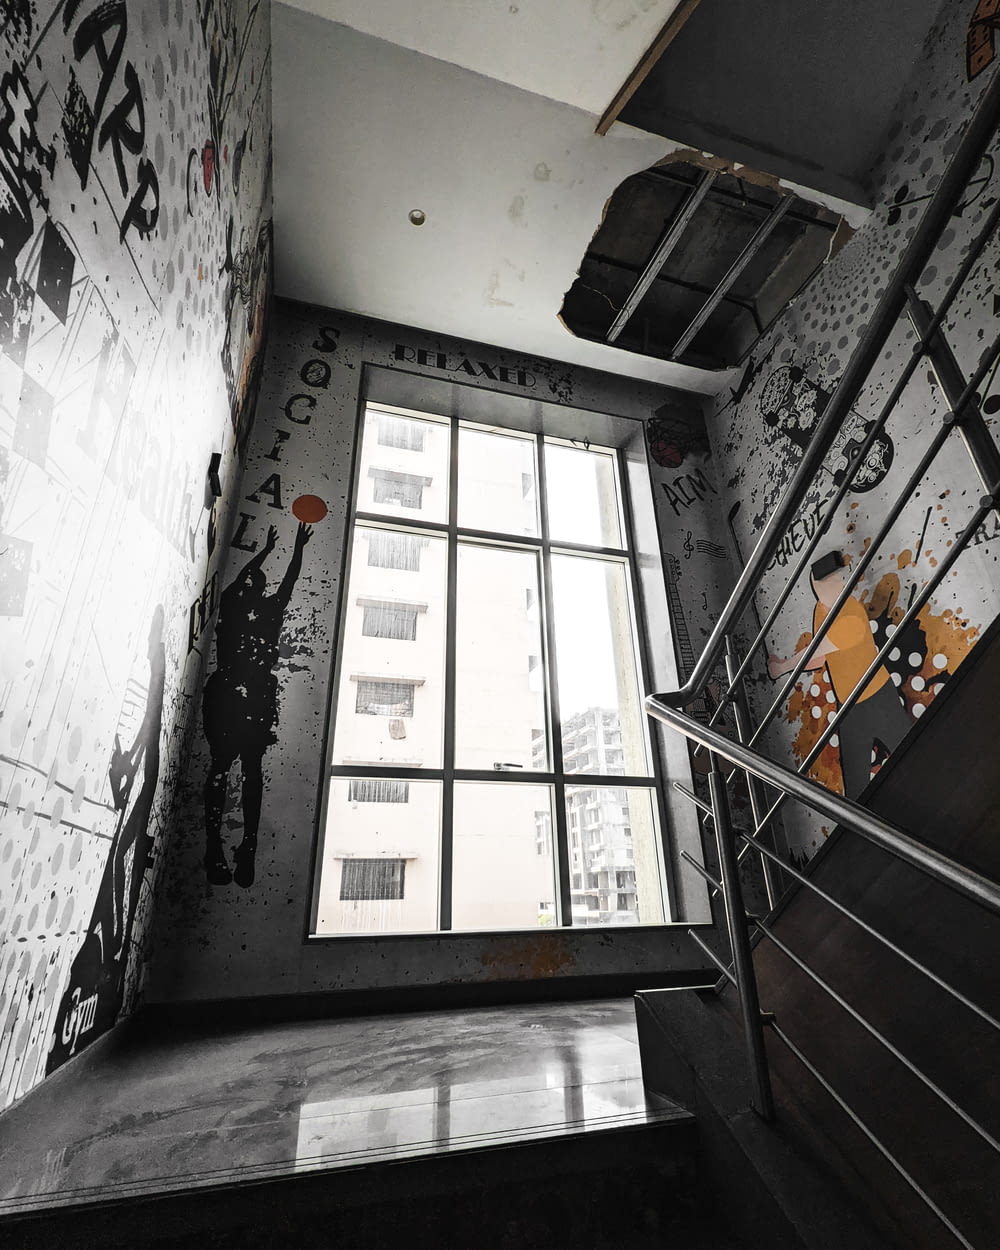 a stairwell with graffiti on the walls and a window